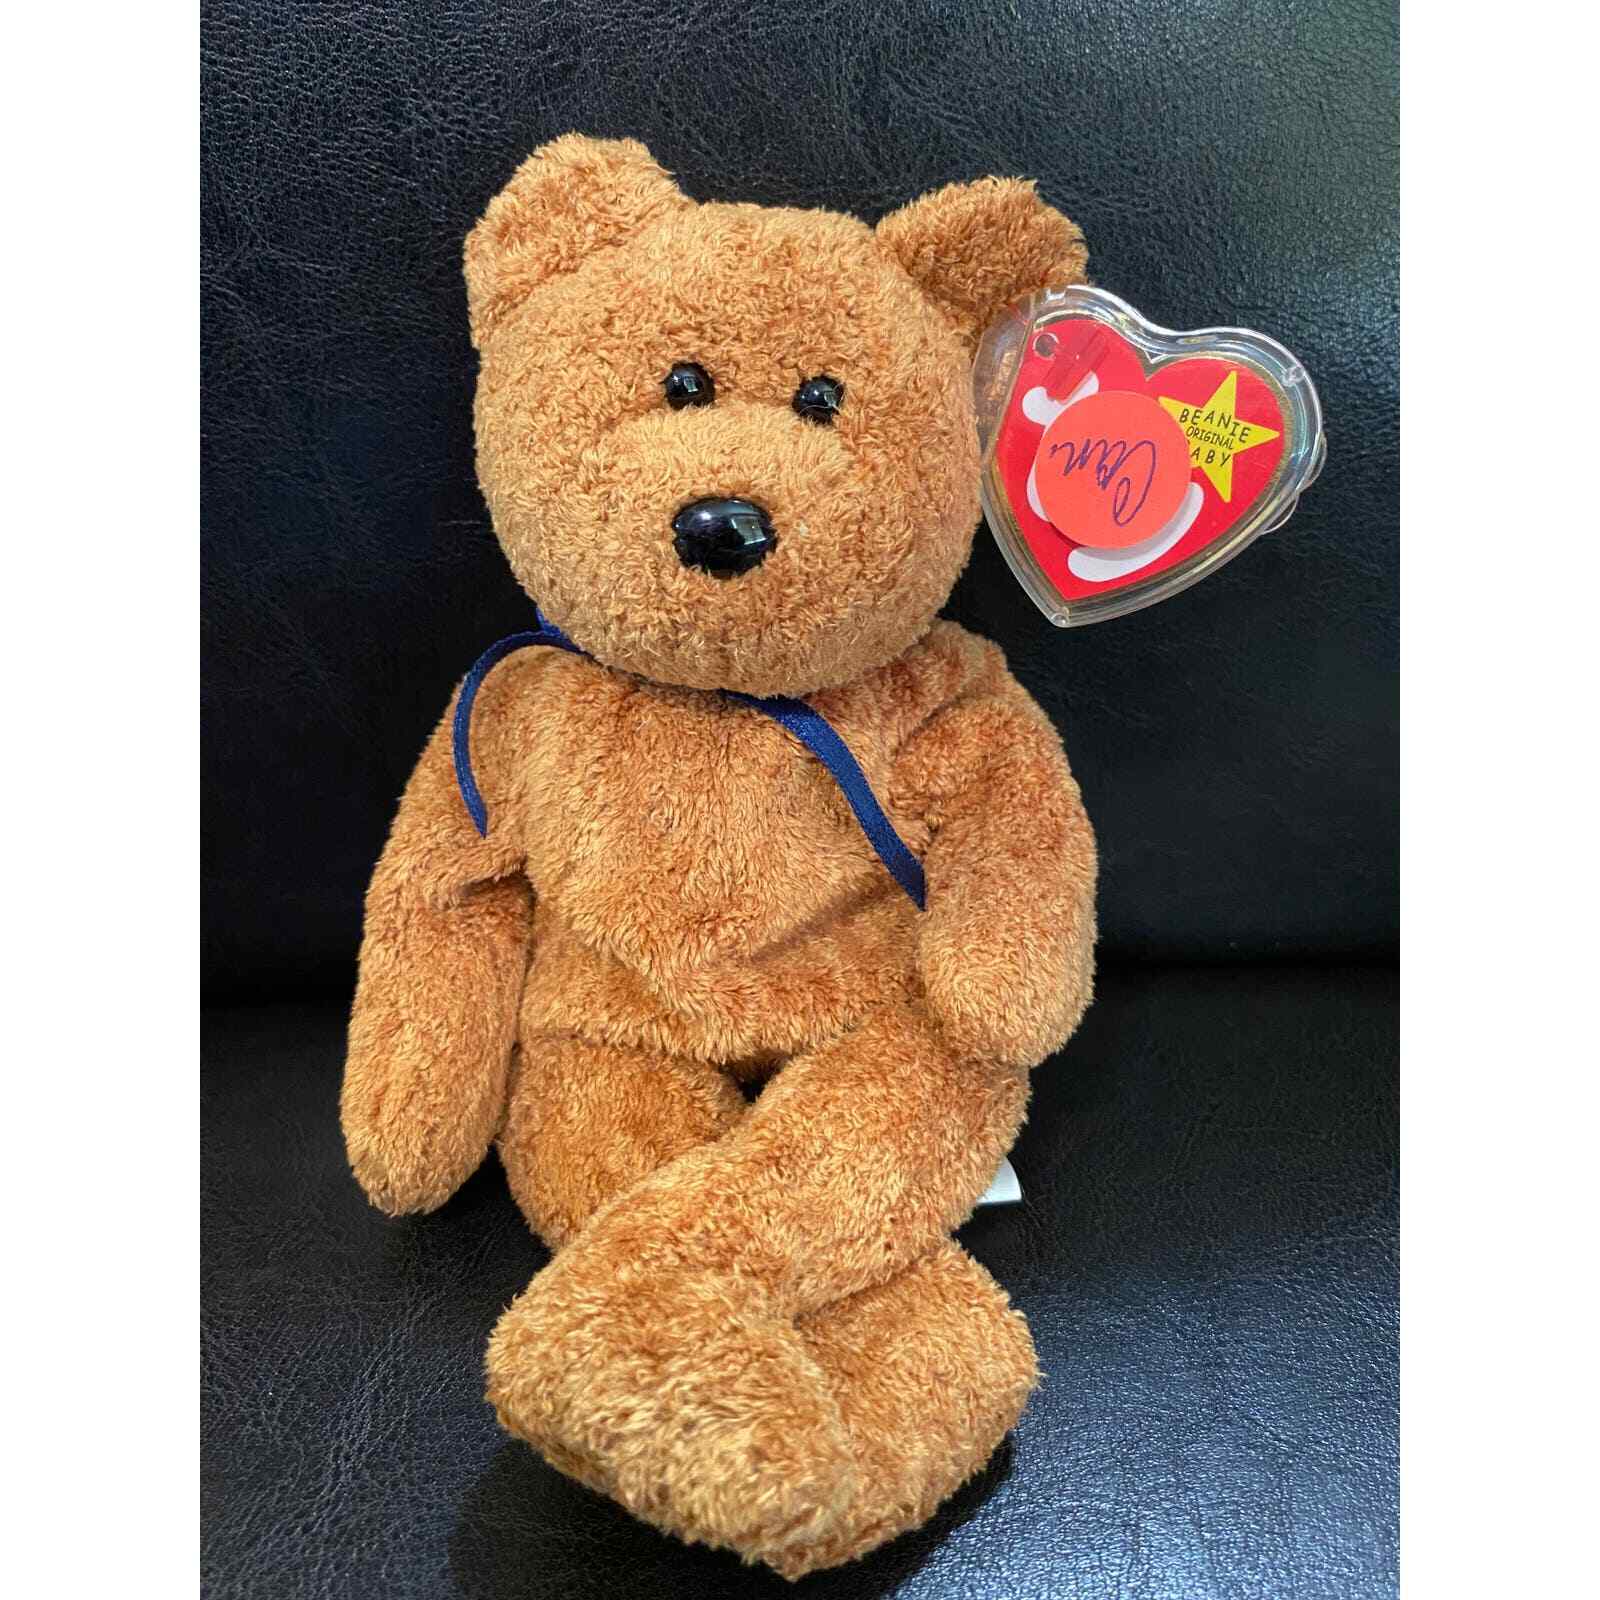 RARE Ty Beanie Baby CANADIAN 🇨🇦 FUZZ the Bear 🧸 with ERRORS❗️❗️❗️ MWMT NWT 🔥